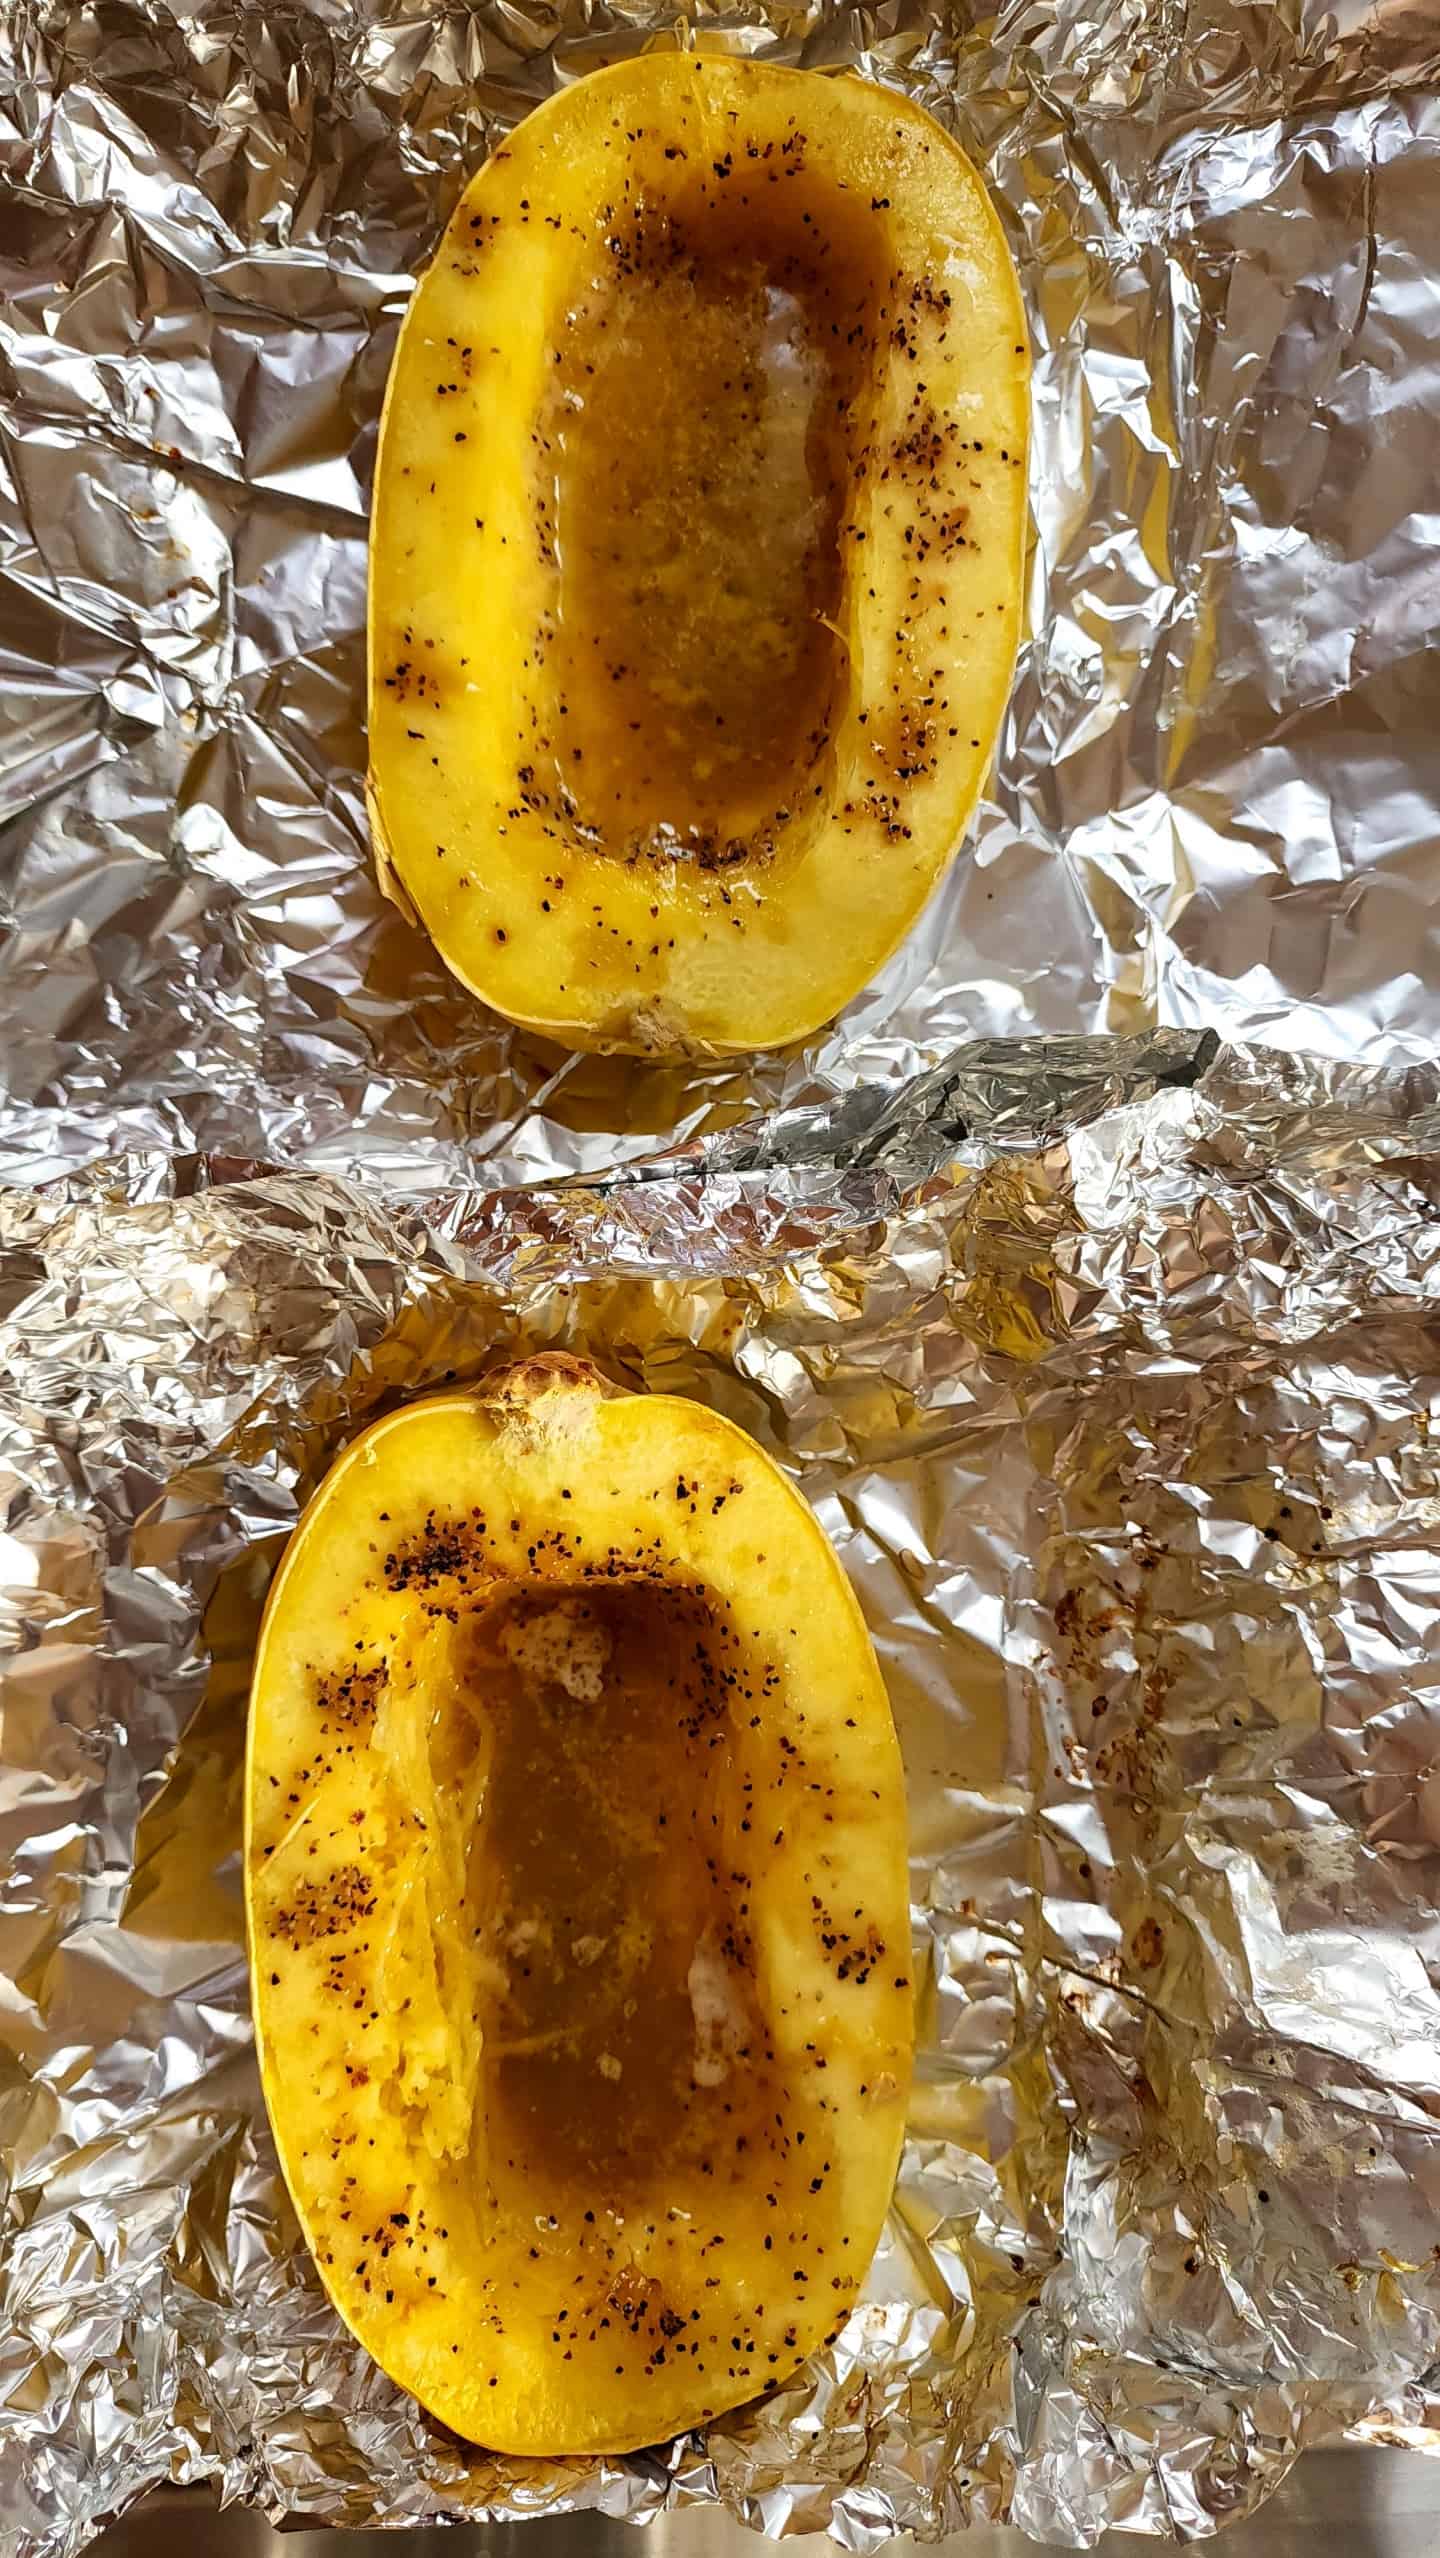 Cooling the baked spahetti squash